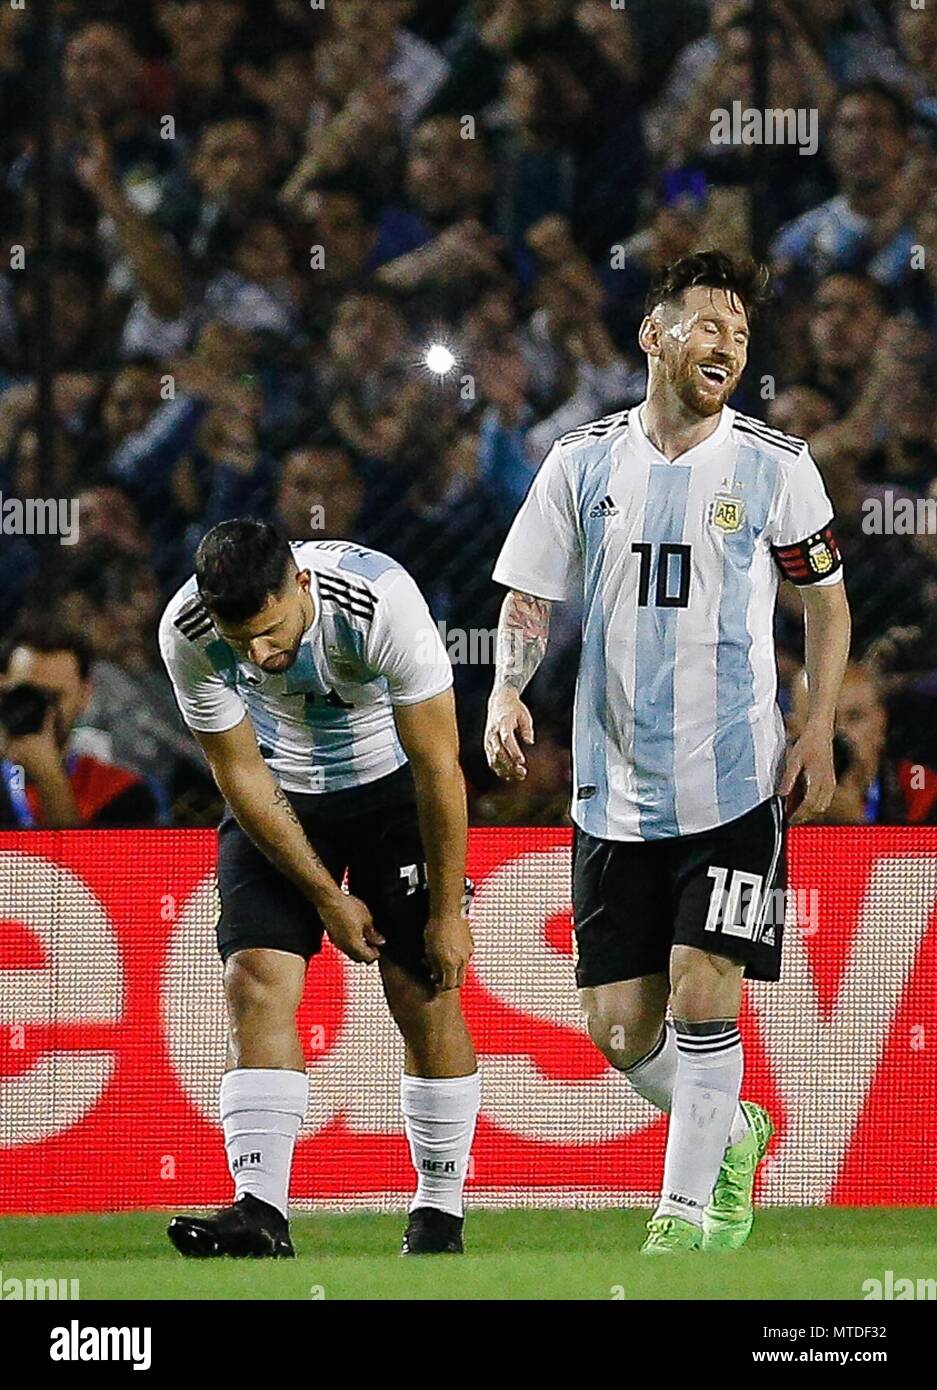 Buenos Aires, Argentina. 29th May, 2018. Lionel Messi of Argentina celebrates after scoring his third goal in the friendly match between Argentina and Haiti, held at the Alberto José Armando Stadium, known as La Bombonera, located in the La Boca neighborhood in the capital of Buenos Aires. Credit: Marcelo Machado de Melo/FotoArena/Alamy Live News Stock Photo